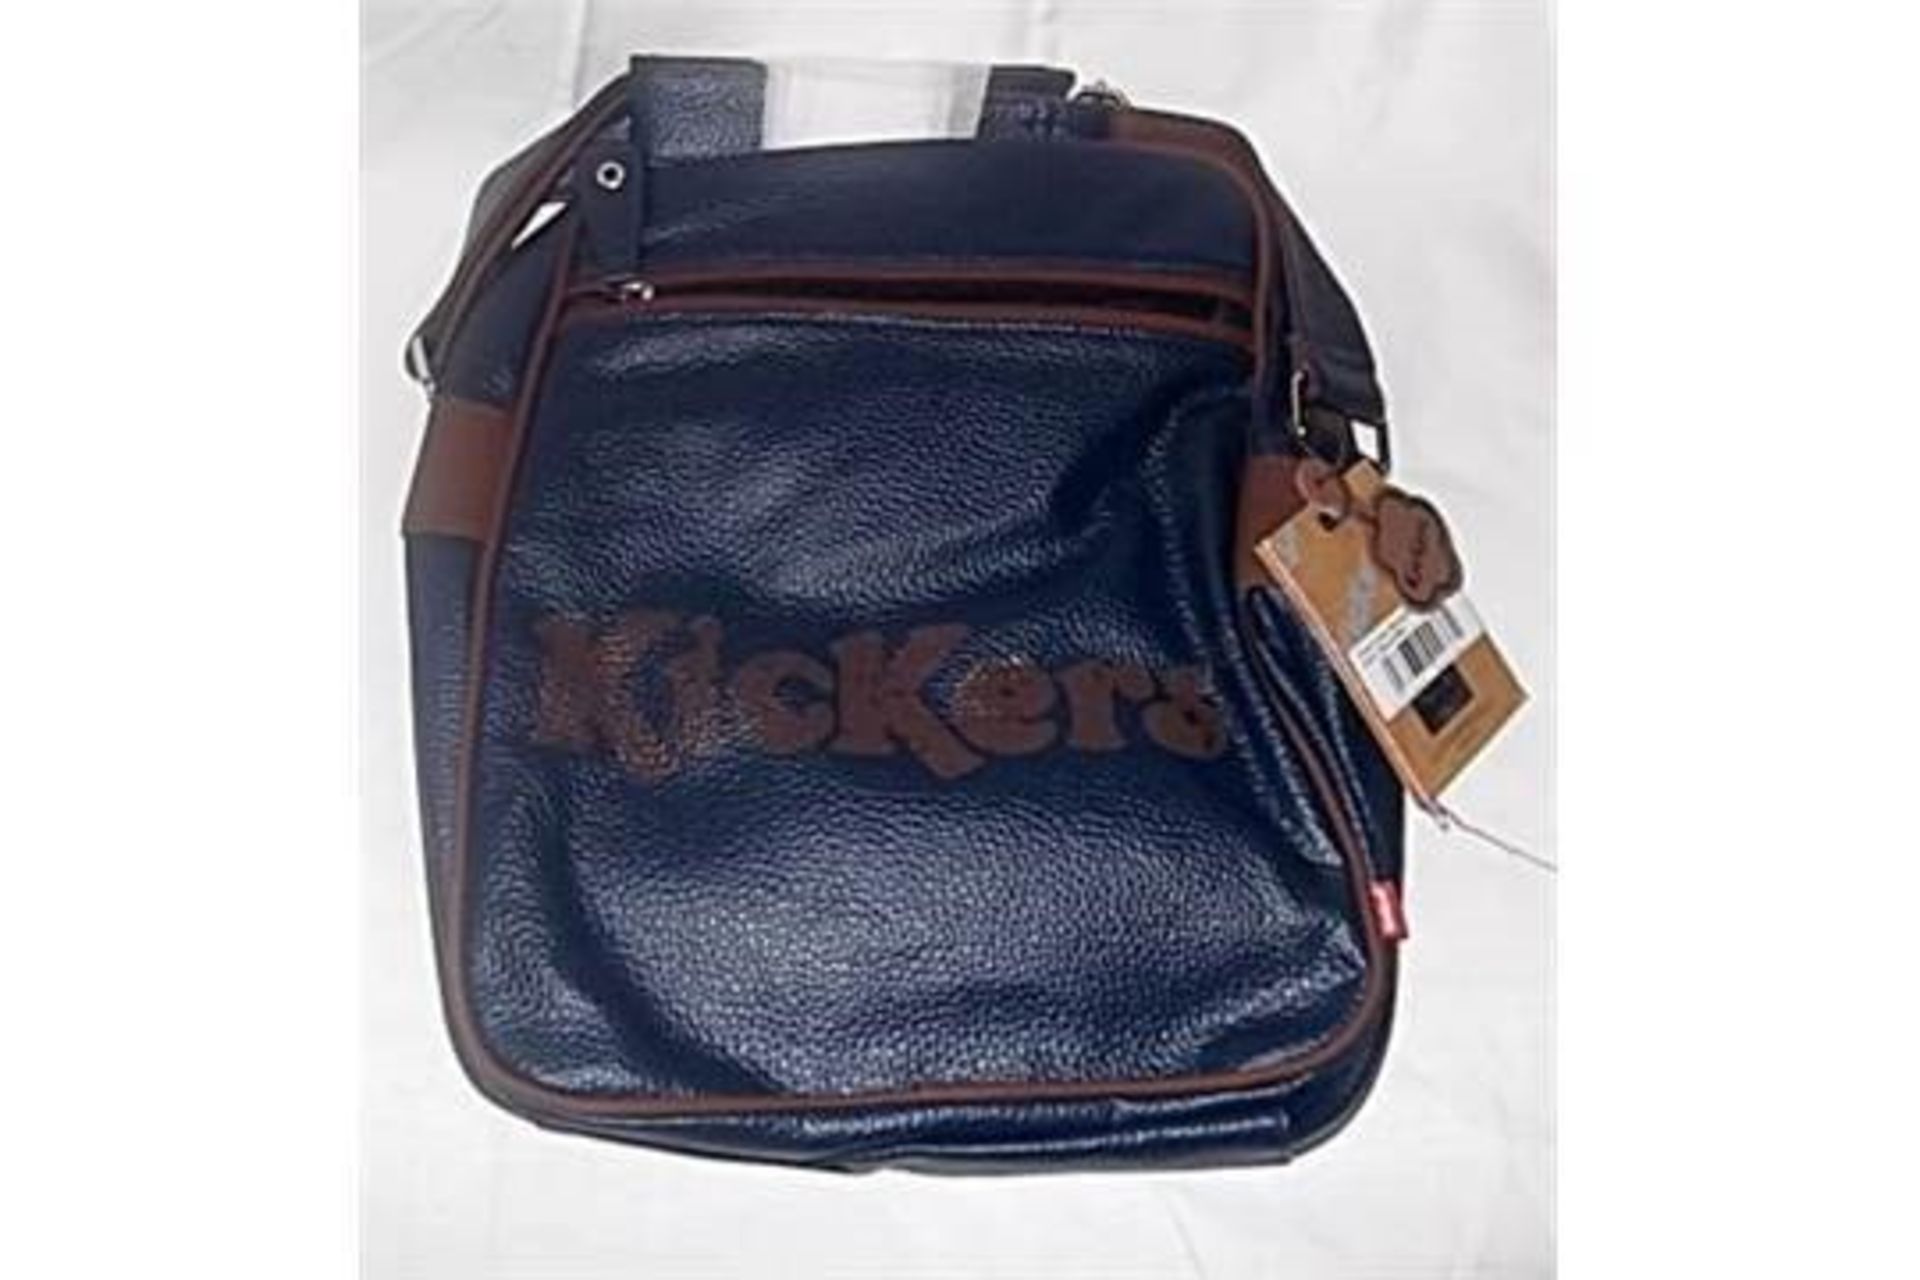 5 x Blue Kickers "RETRO" Flight-style Bags - All New With Tags - CL008 - Excellent Resale